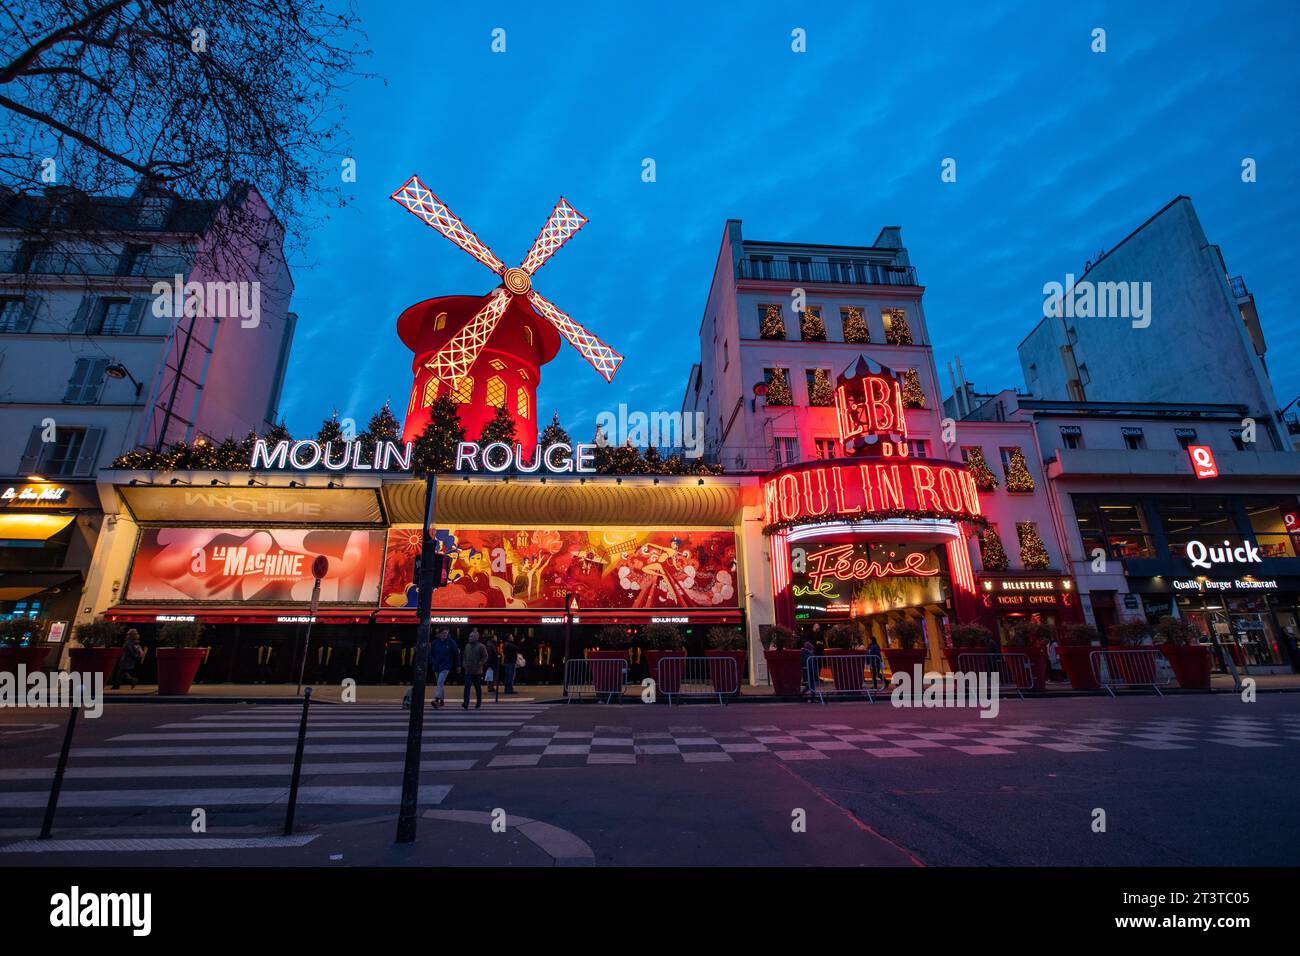 The Moulin Rouge windmill, Moulin Rouge is a famous cabaret built in 1889, located in the red-light district of Pigalle in Paris, France. Stock Photo